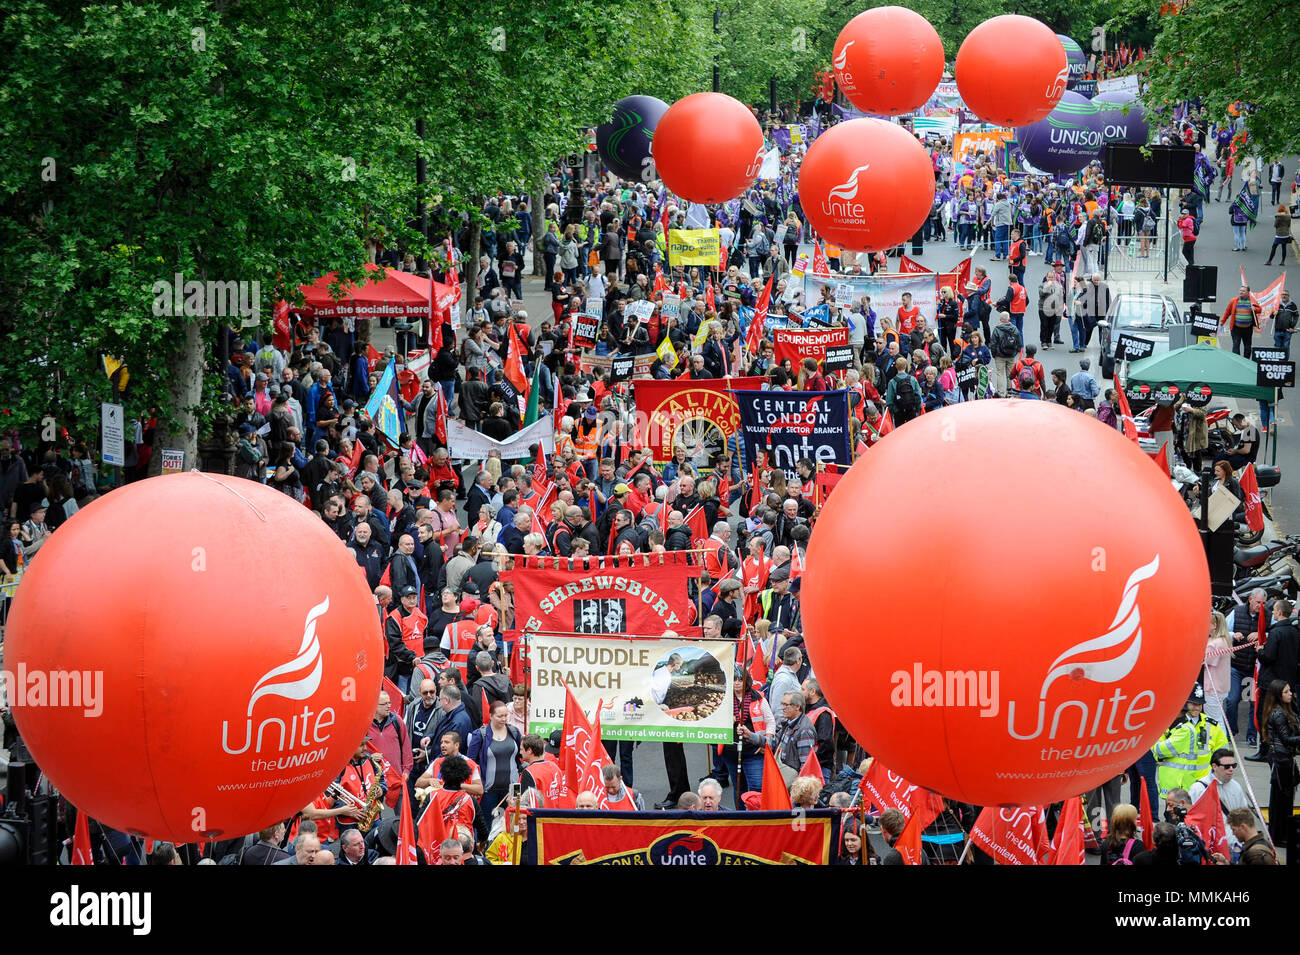 London, UK.  12 May 2018. People join a Trades Union Congress (TUC) march and rally in central London.   Thousands of demonstrators called for improved workers' pay and rights as well as improvement to pubic services as they marched from Embankment to Hyde Park.  Credit: Stephen Chung / Alamy Live News Stock Photo